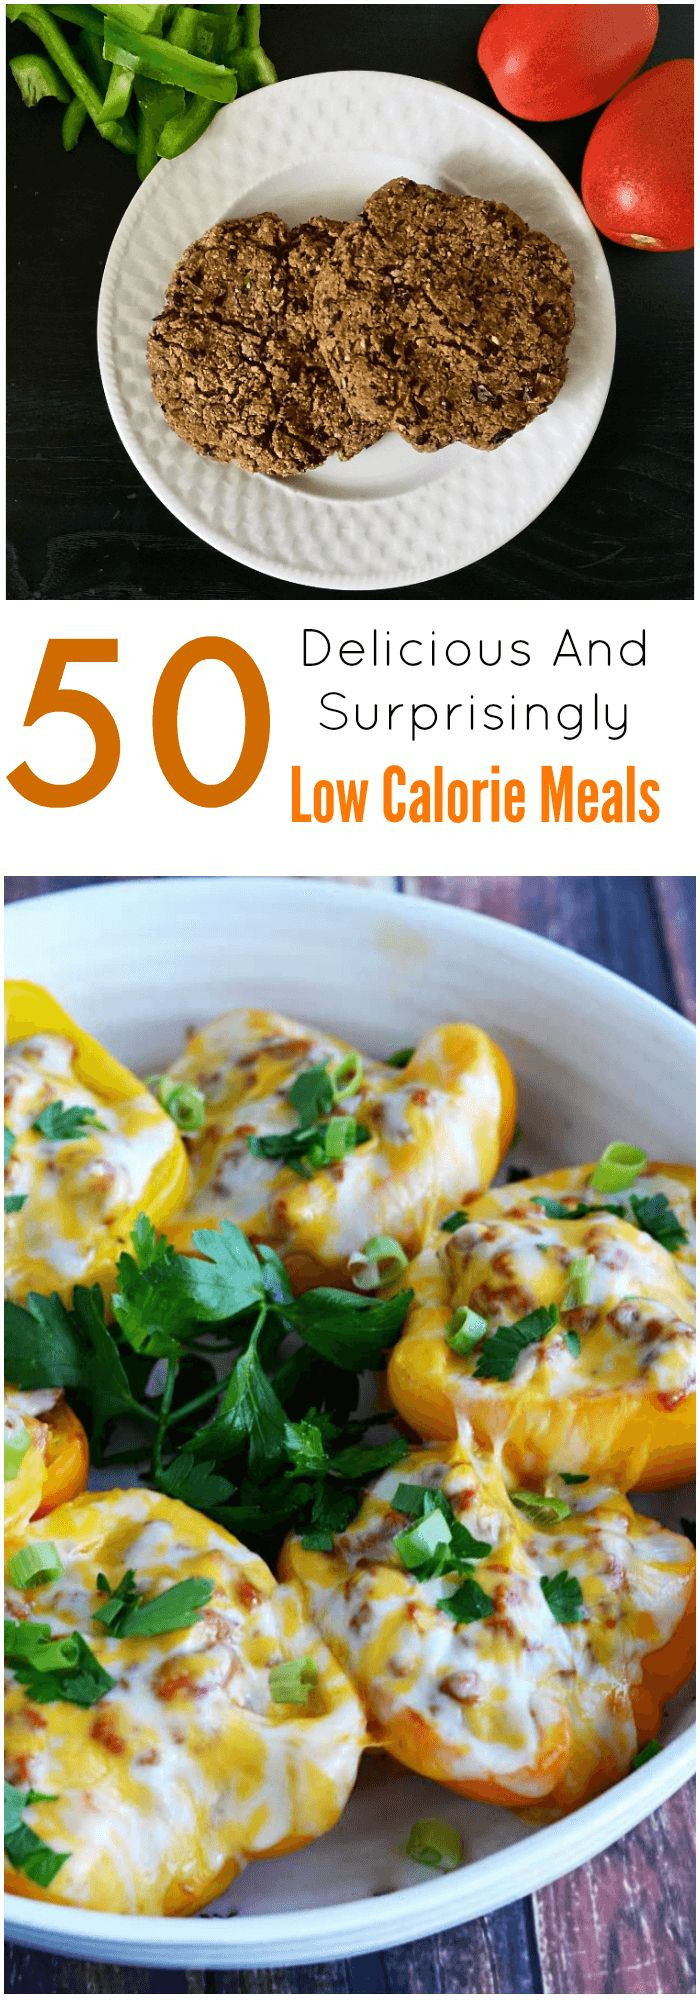 Low Calorie Healthy Dinners
 50 Delicious And Surprisingly Low Calorie Meals